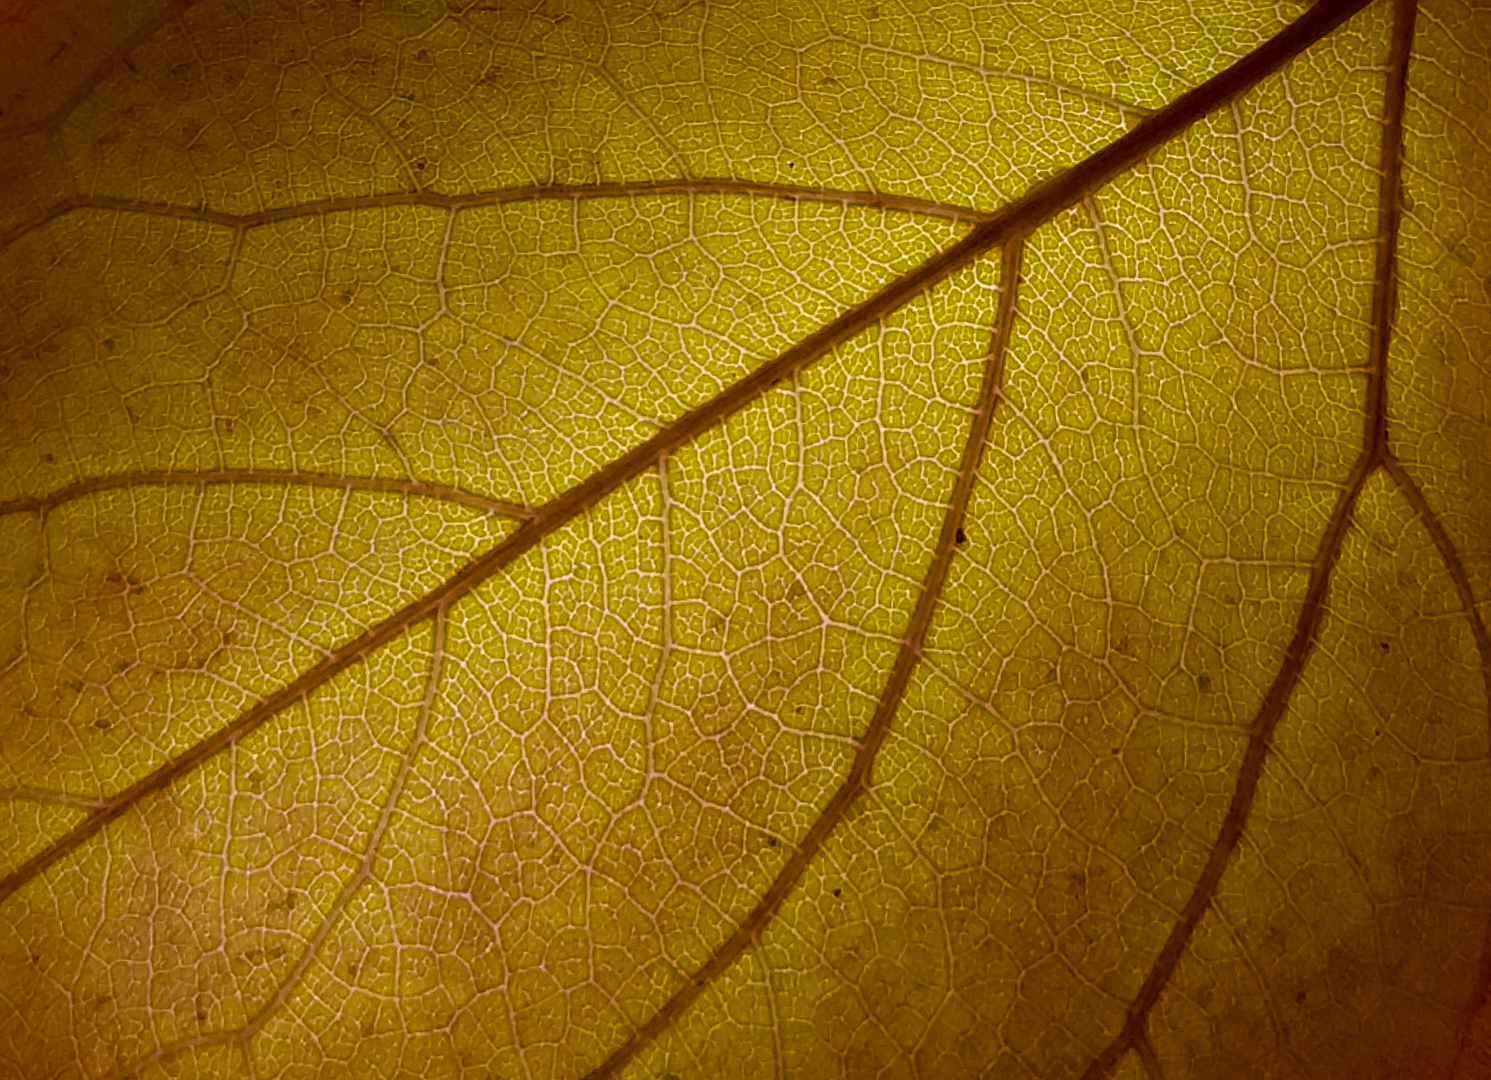 Julie Deer Highly Commended Autumn Veins June 2020   Phone Photography